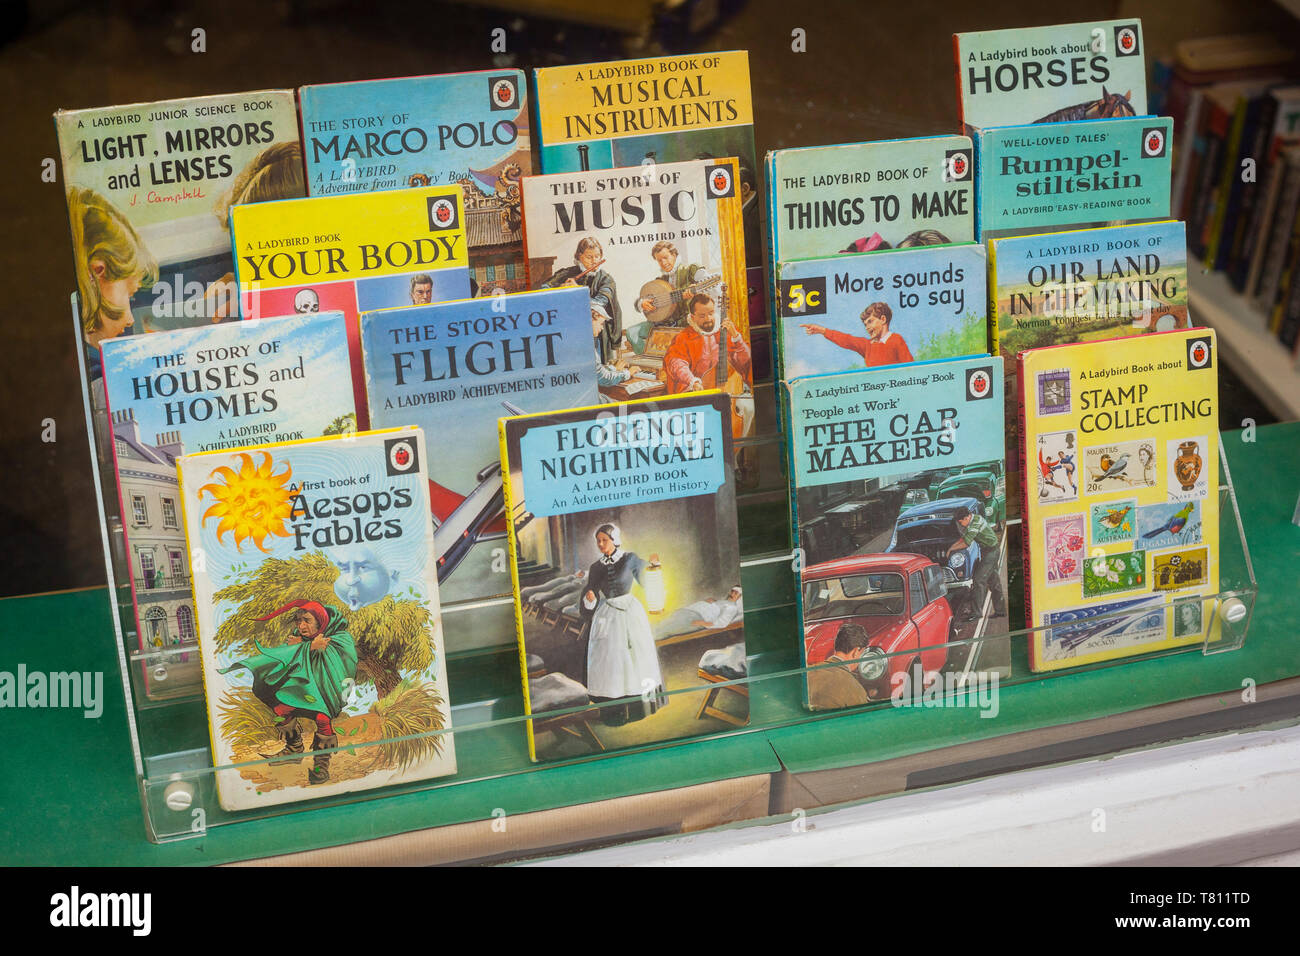 A display of Ladybird children's books in a shop window. Stock Photo